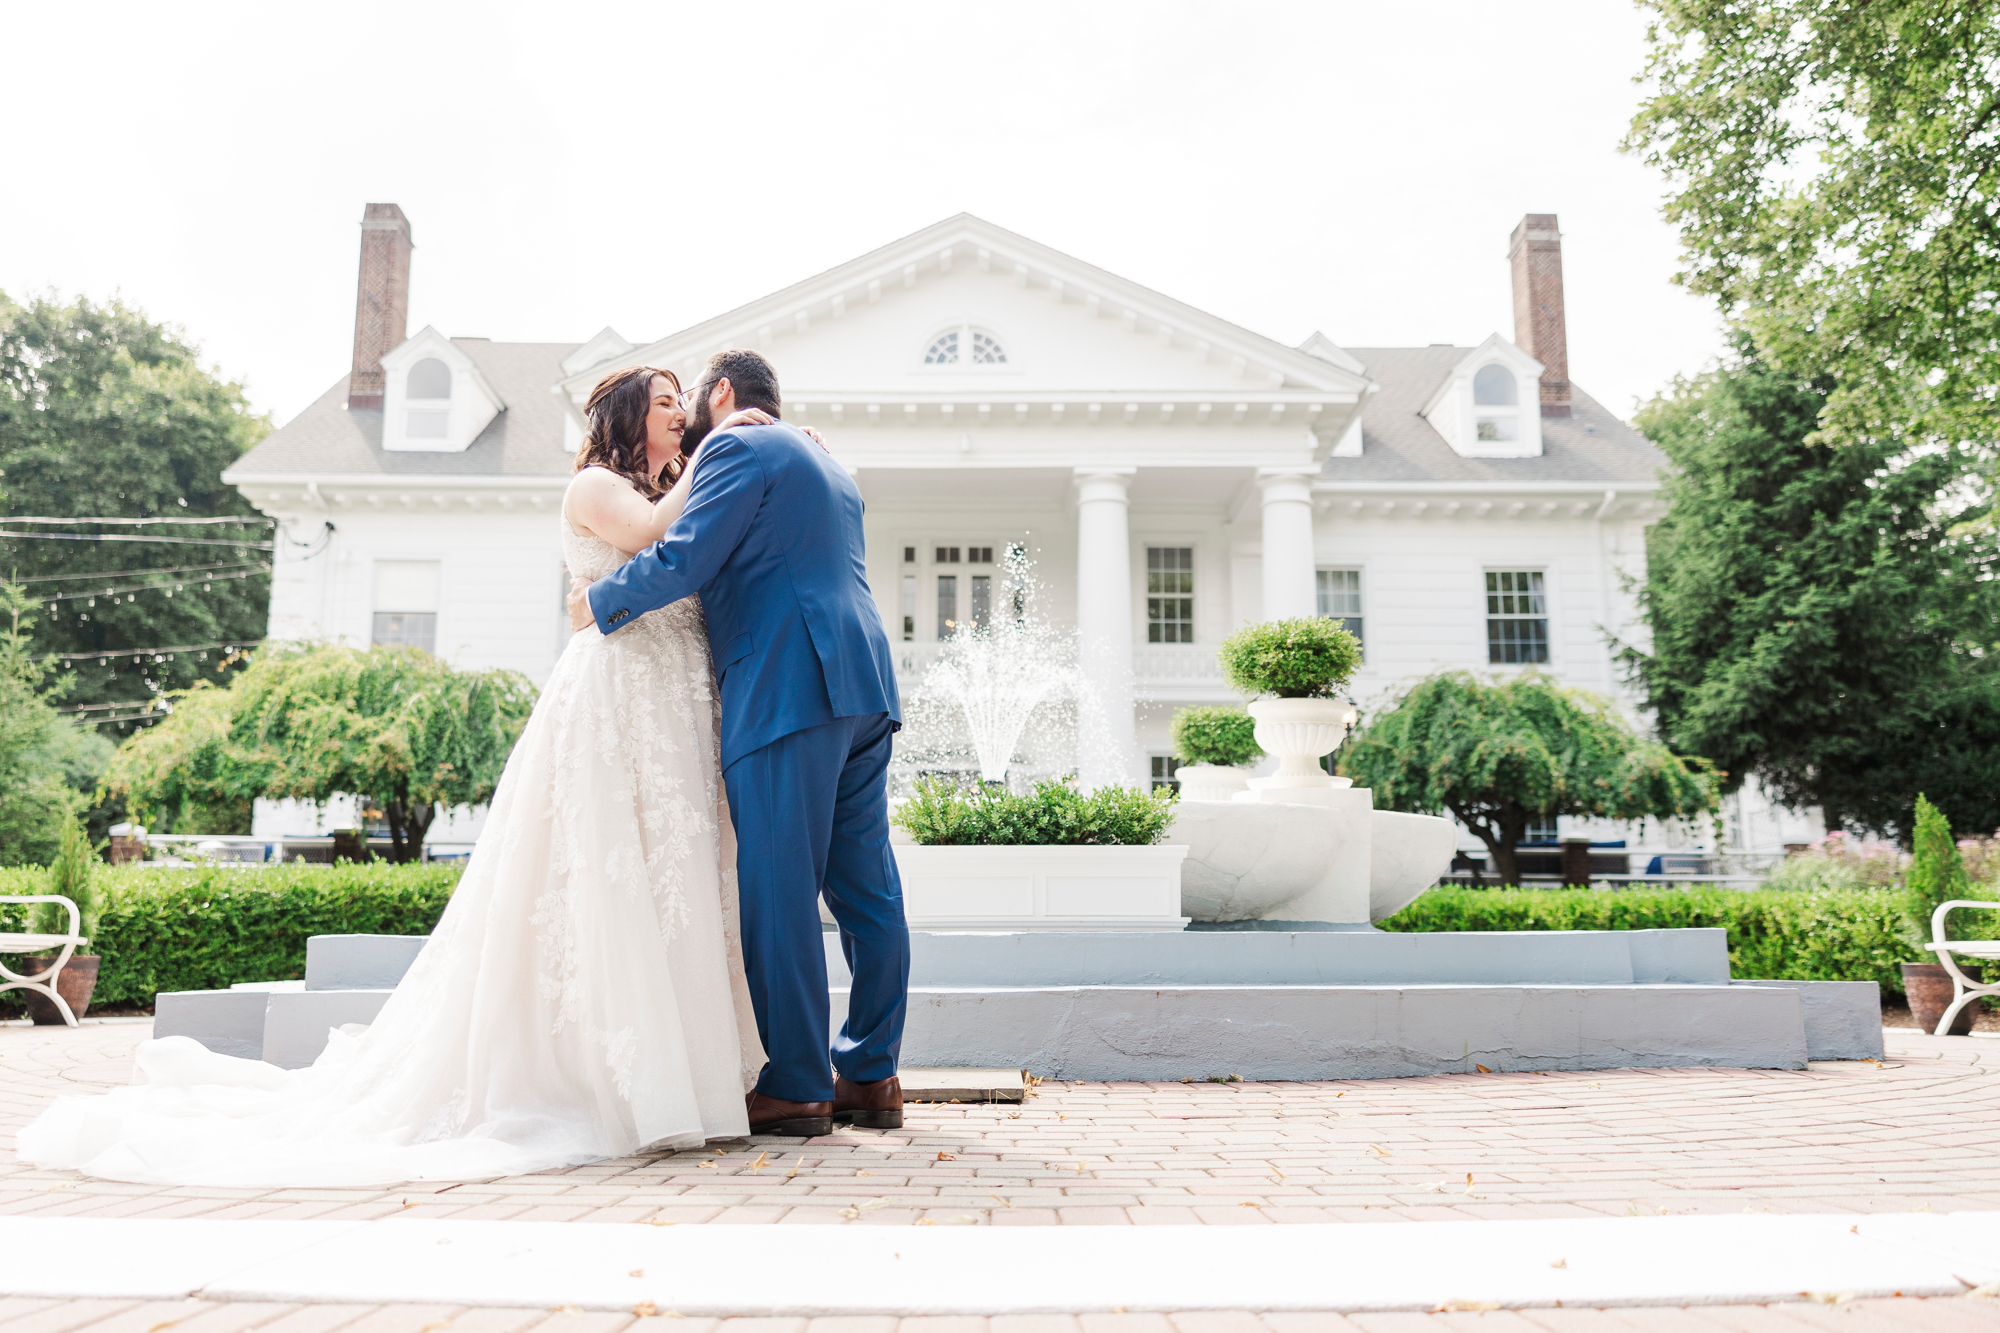 Unique Wedding at Briarcliff Manor in New York